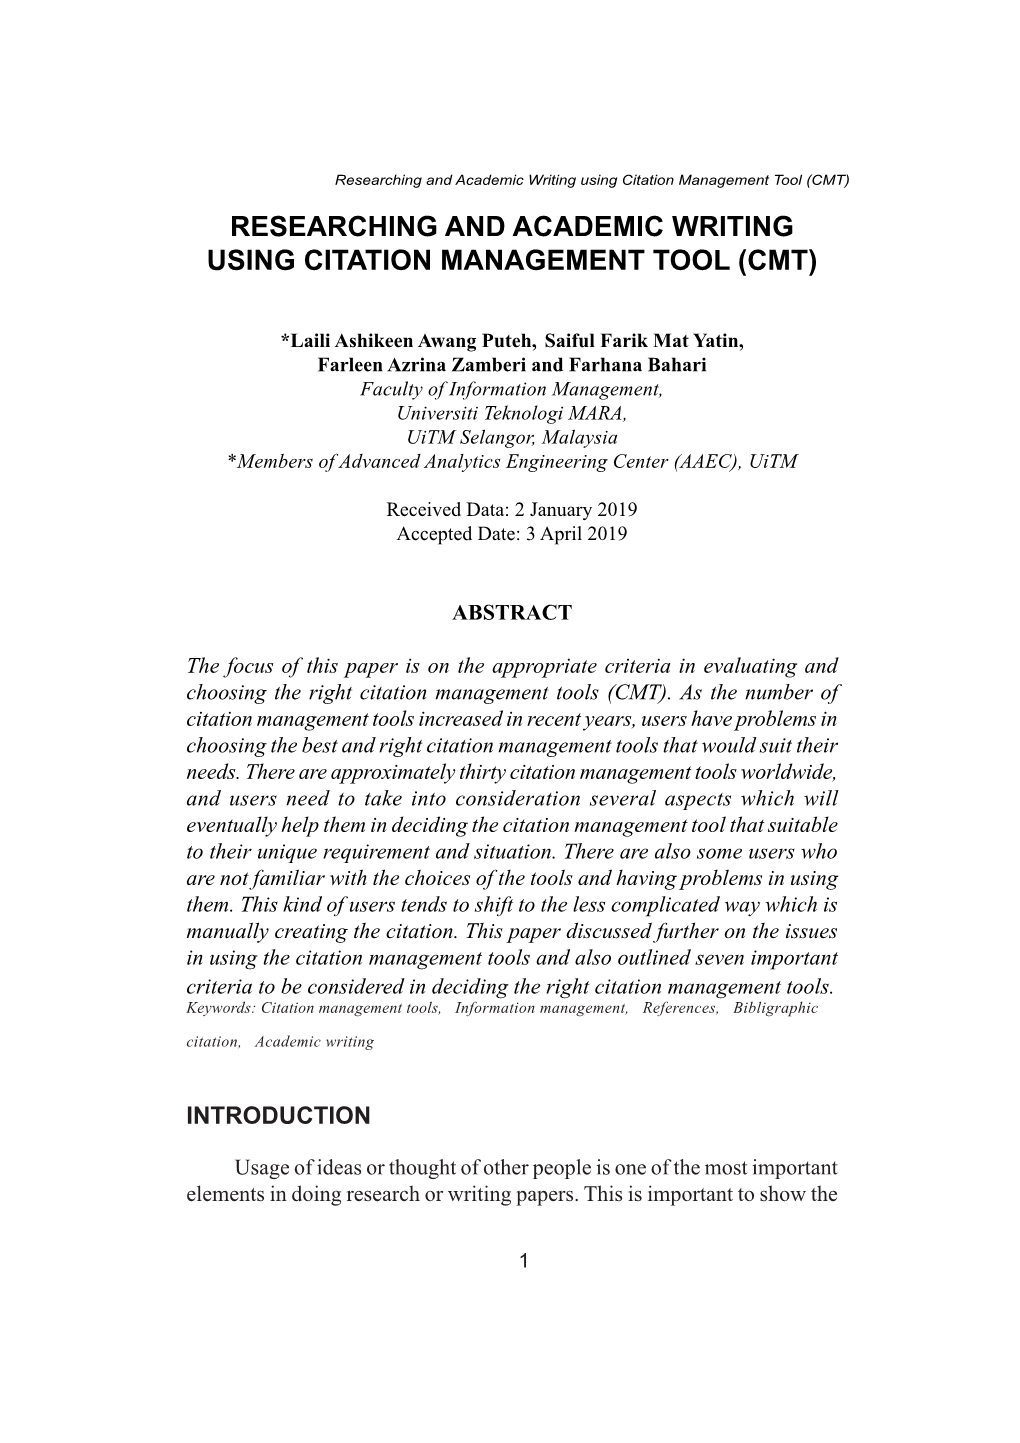 Researching and Academic Writing Using Citation Management Tool (CMT) RESEARCHING and ACADEMIC WRITING USING CITATION MANAGEMENT TOOL (CMT)